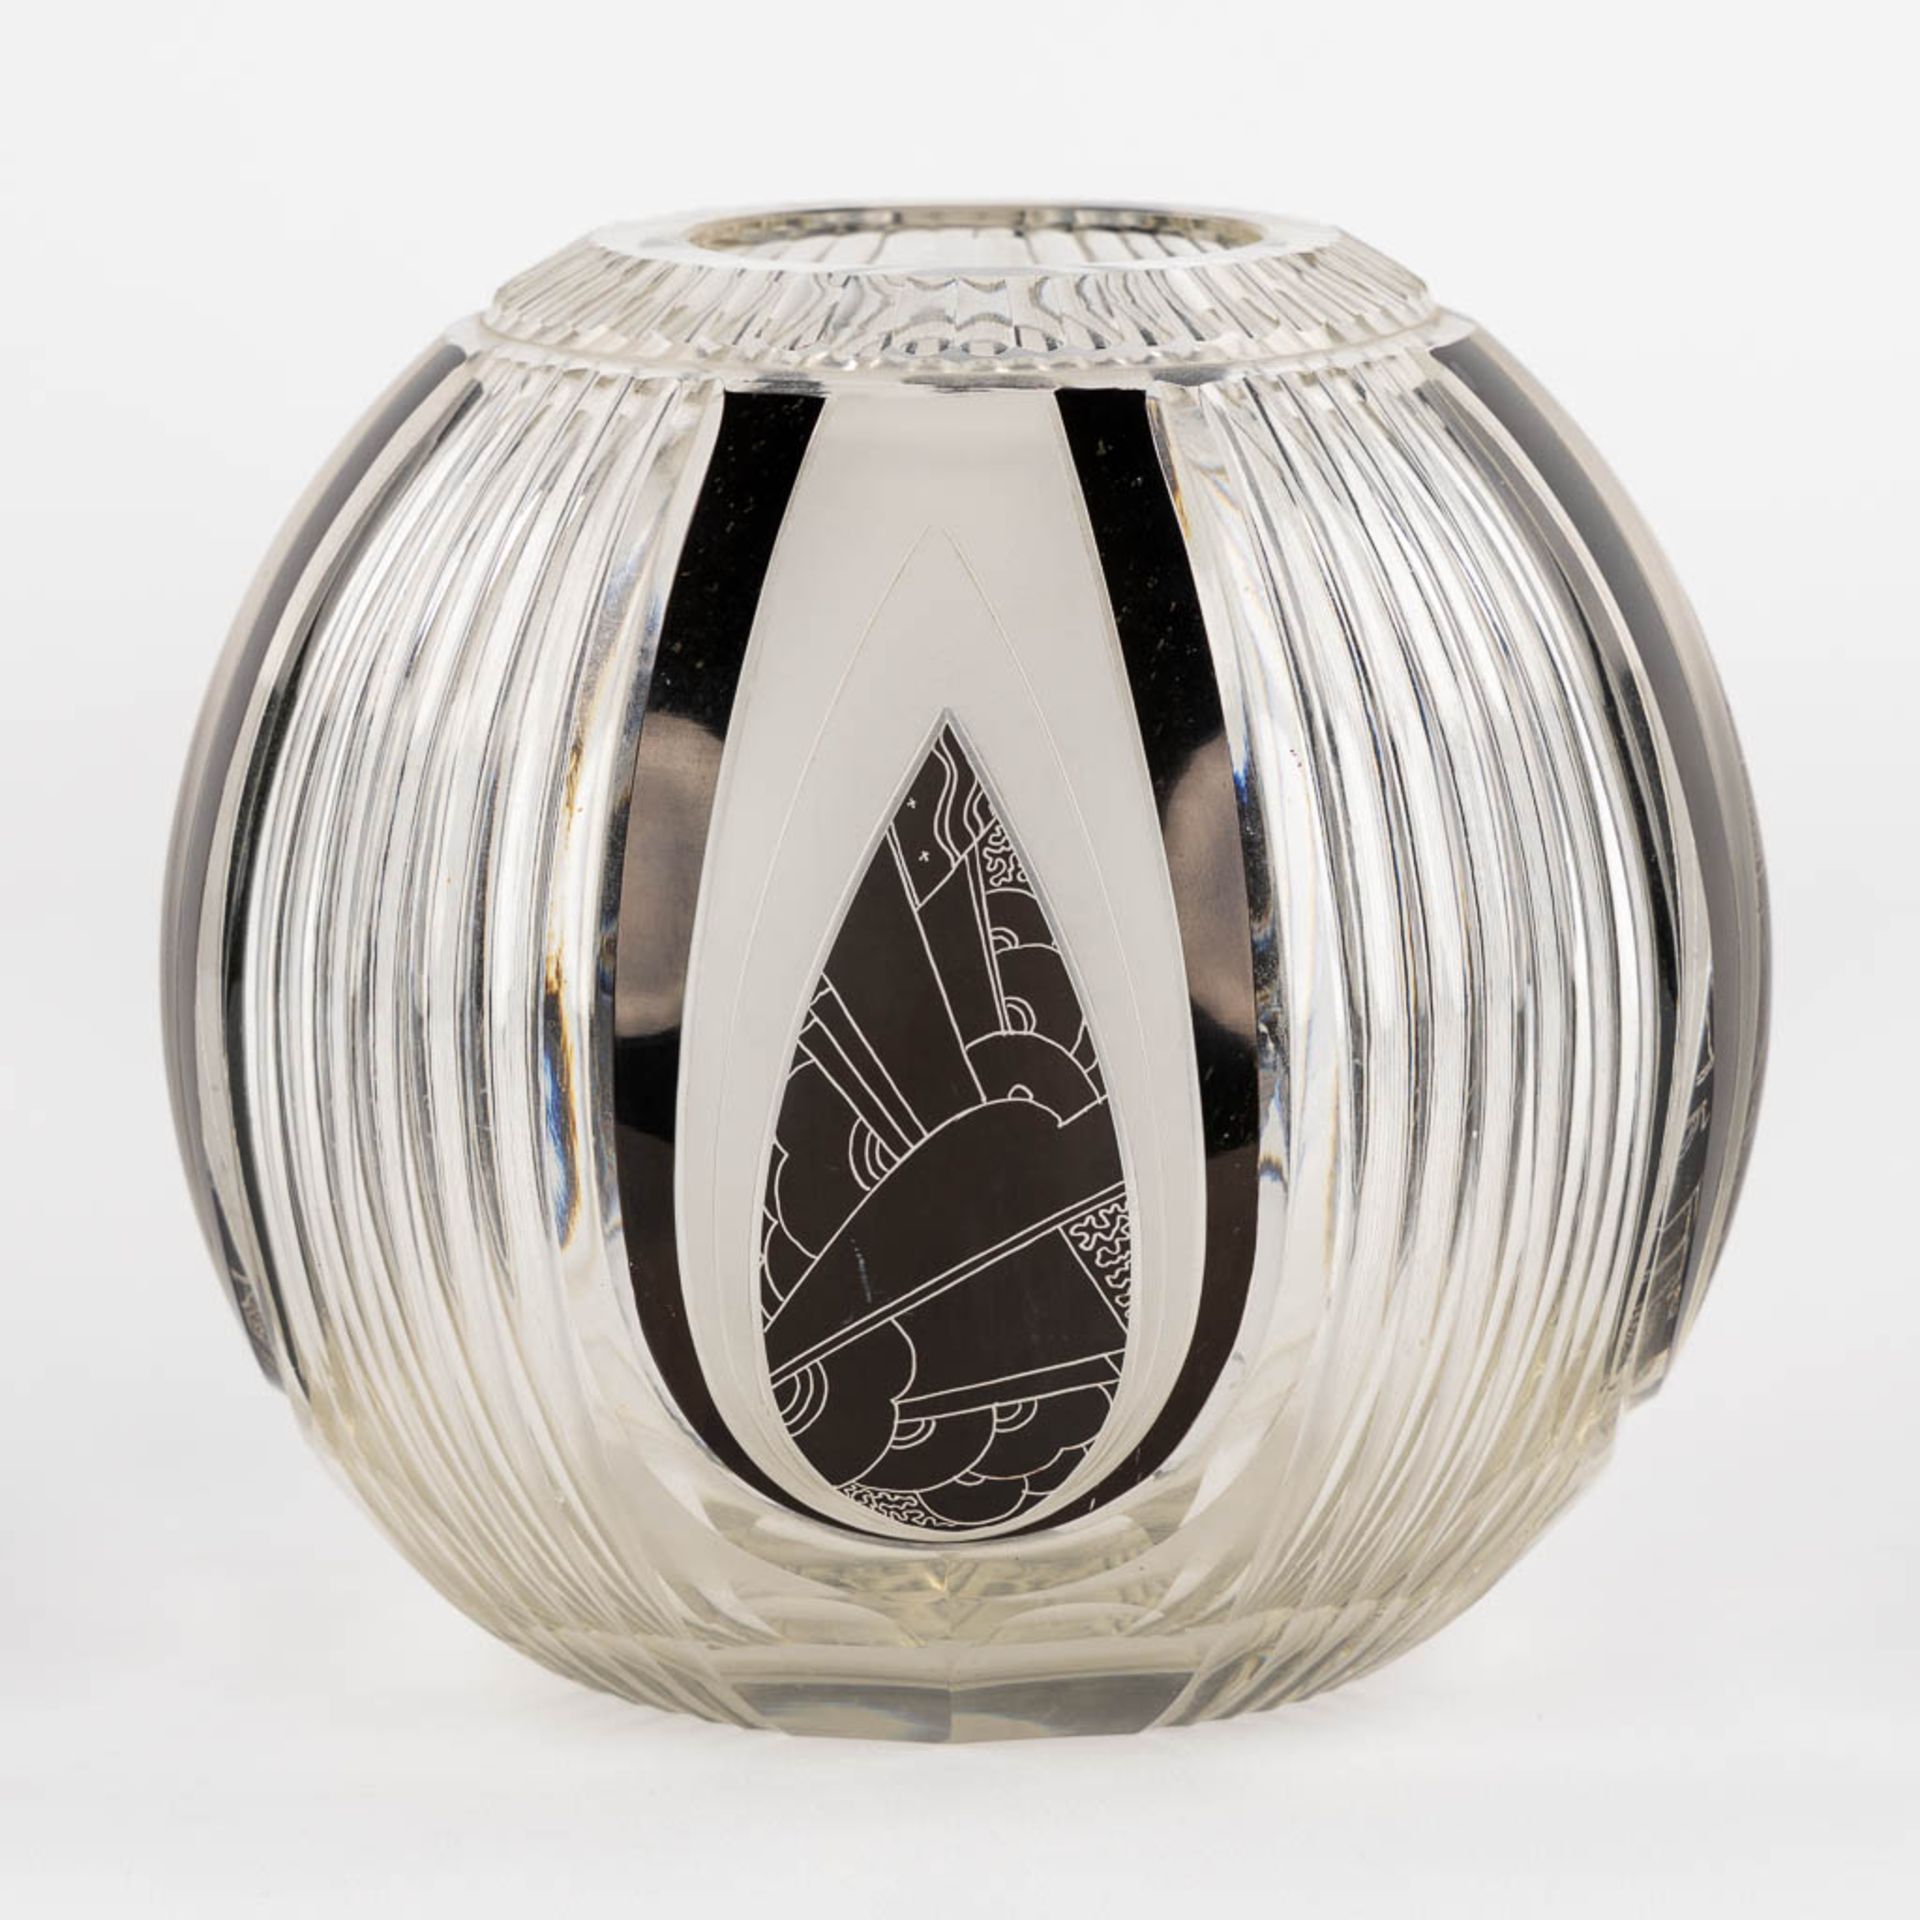 A round vase, glass in art deco style. (H:18 x D:18 cm) - Image 6 of 10